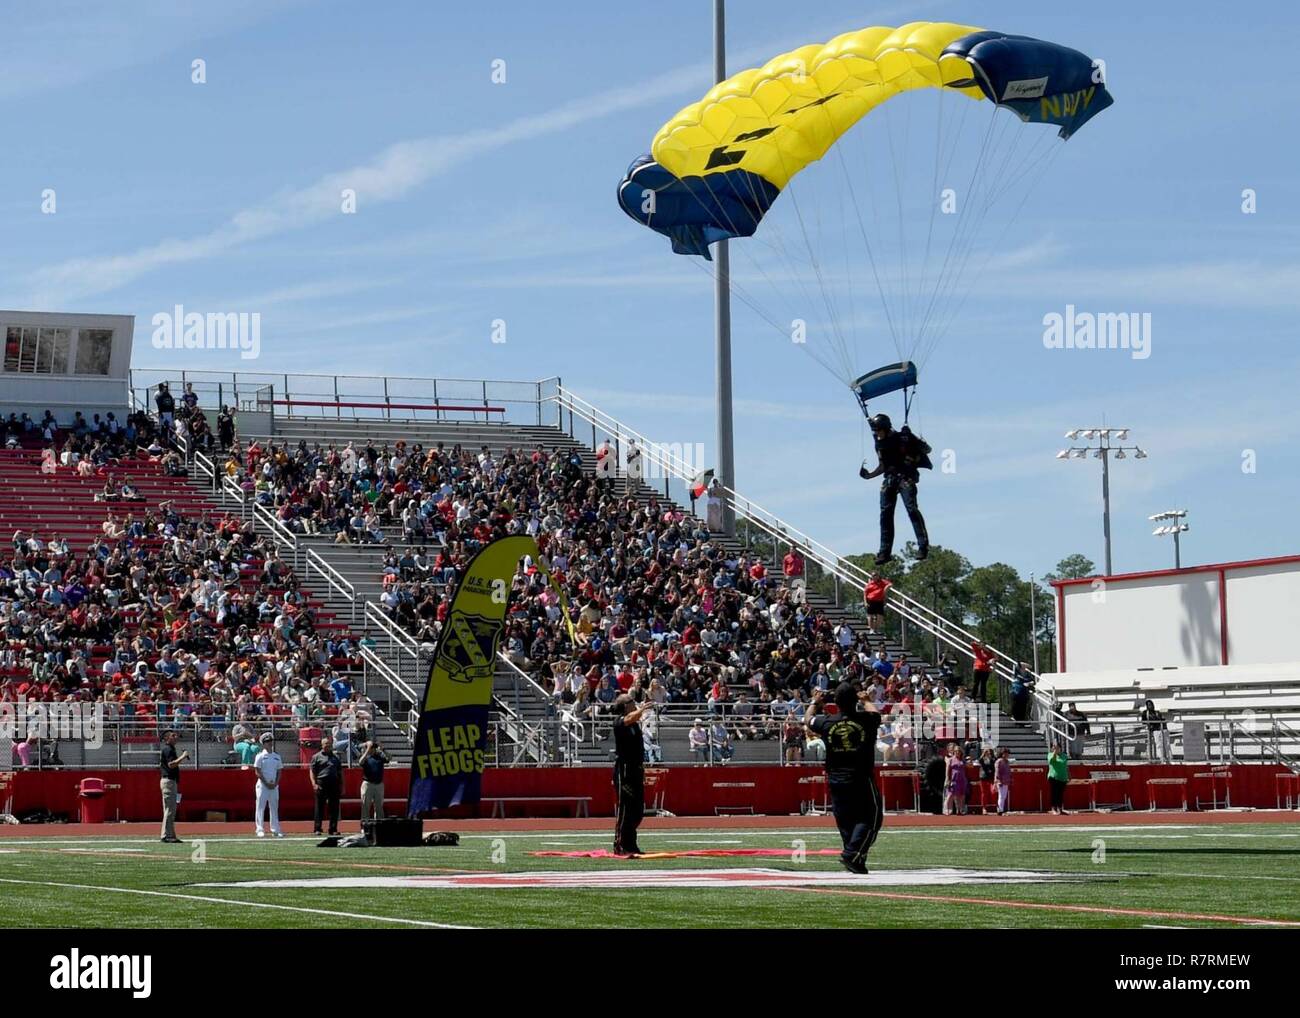 BILOXI, Miss. (April 4, 2017) A member of the U.S. Navy Parachute Team “The Leap Frogs” lands during a skydiving demonstration at the Biloxi High School stadium as part of Mississippi Gulf Coast Navy Week. Gulfport/Biloxi is one of select regions to host a 2017 Navy Week, a week dedicated to raise U.S. Navy awareness in through local outreach, community service and exhibitions. Stock Photo